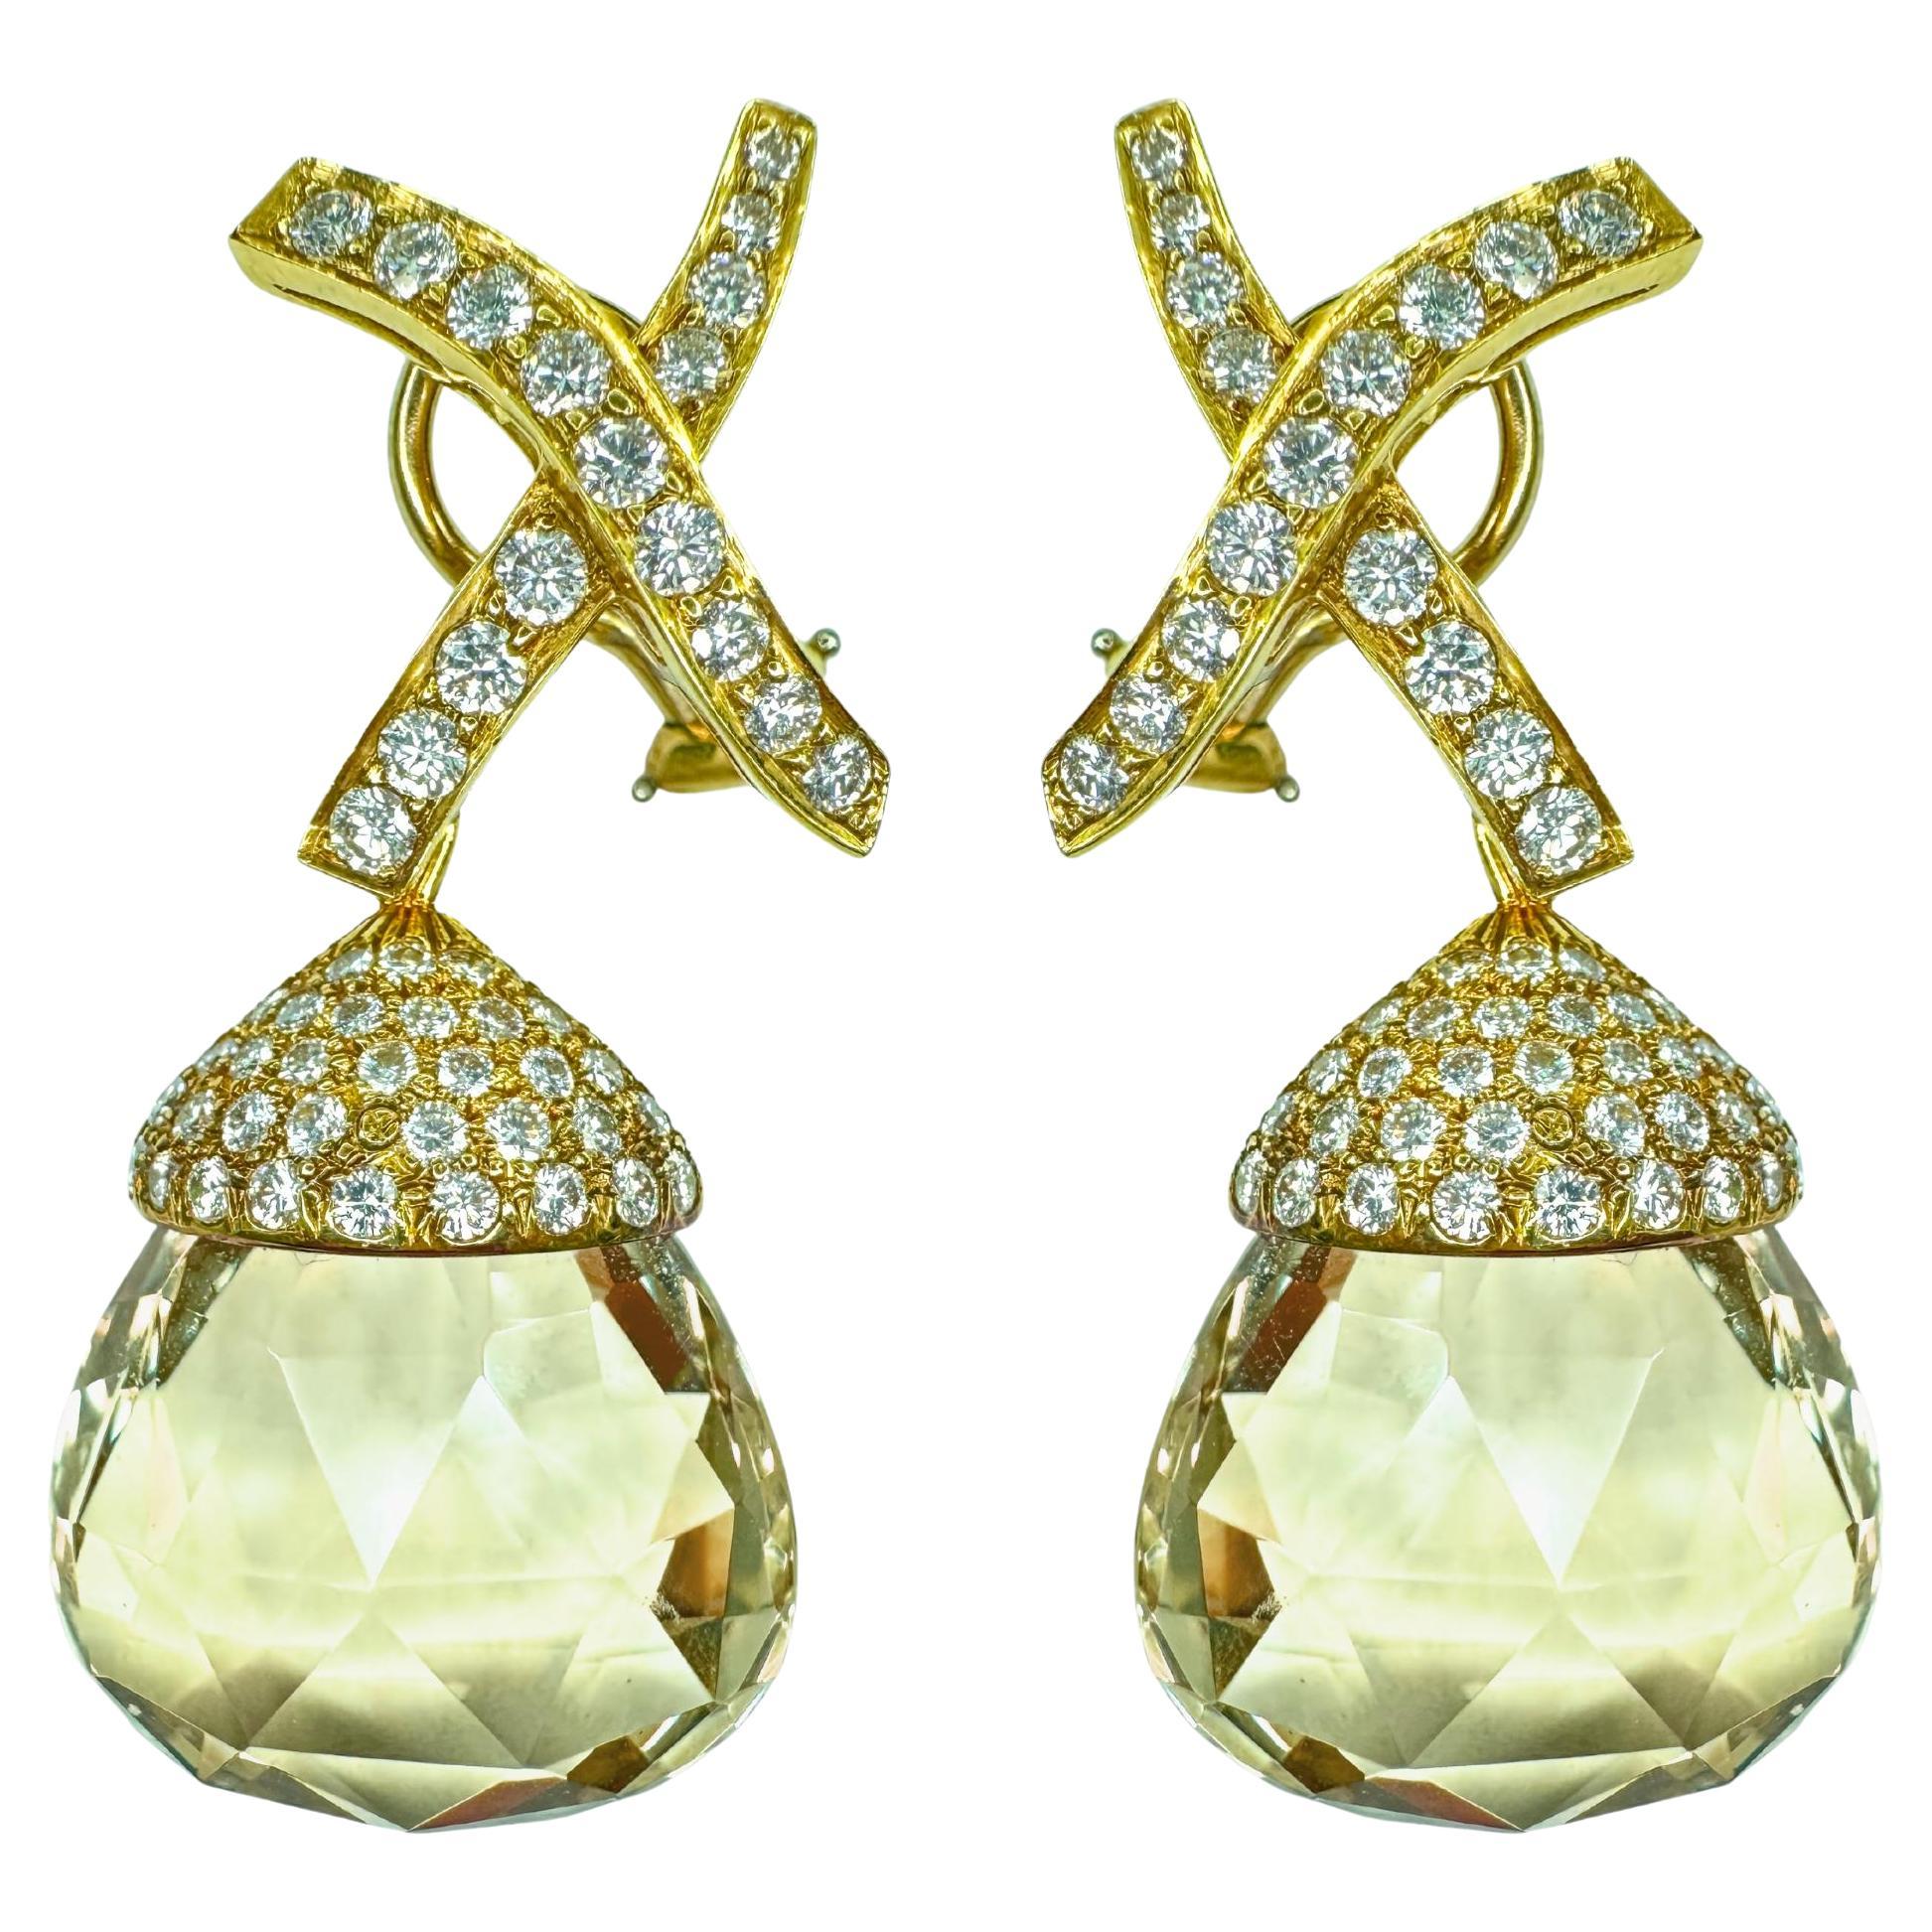 18k TIffany Diamond and Lemon Citrine Day-Night Earrings Signed Paloma Picasso For Sale